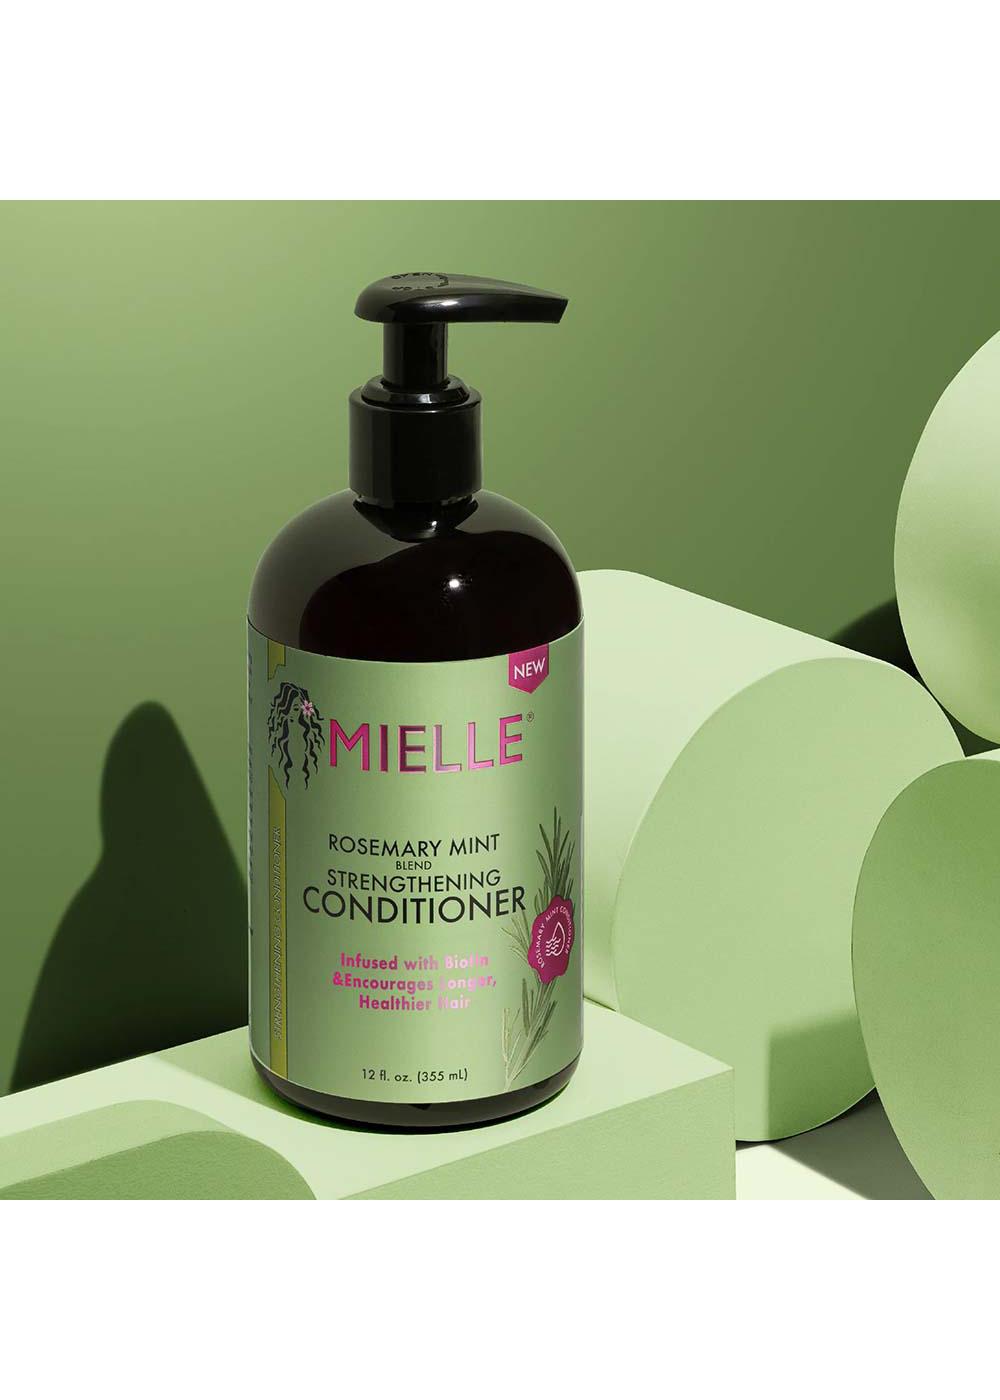 Mielle Rosemary Mint Blend Strengthening Conditioner; image 3 of 3